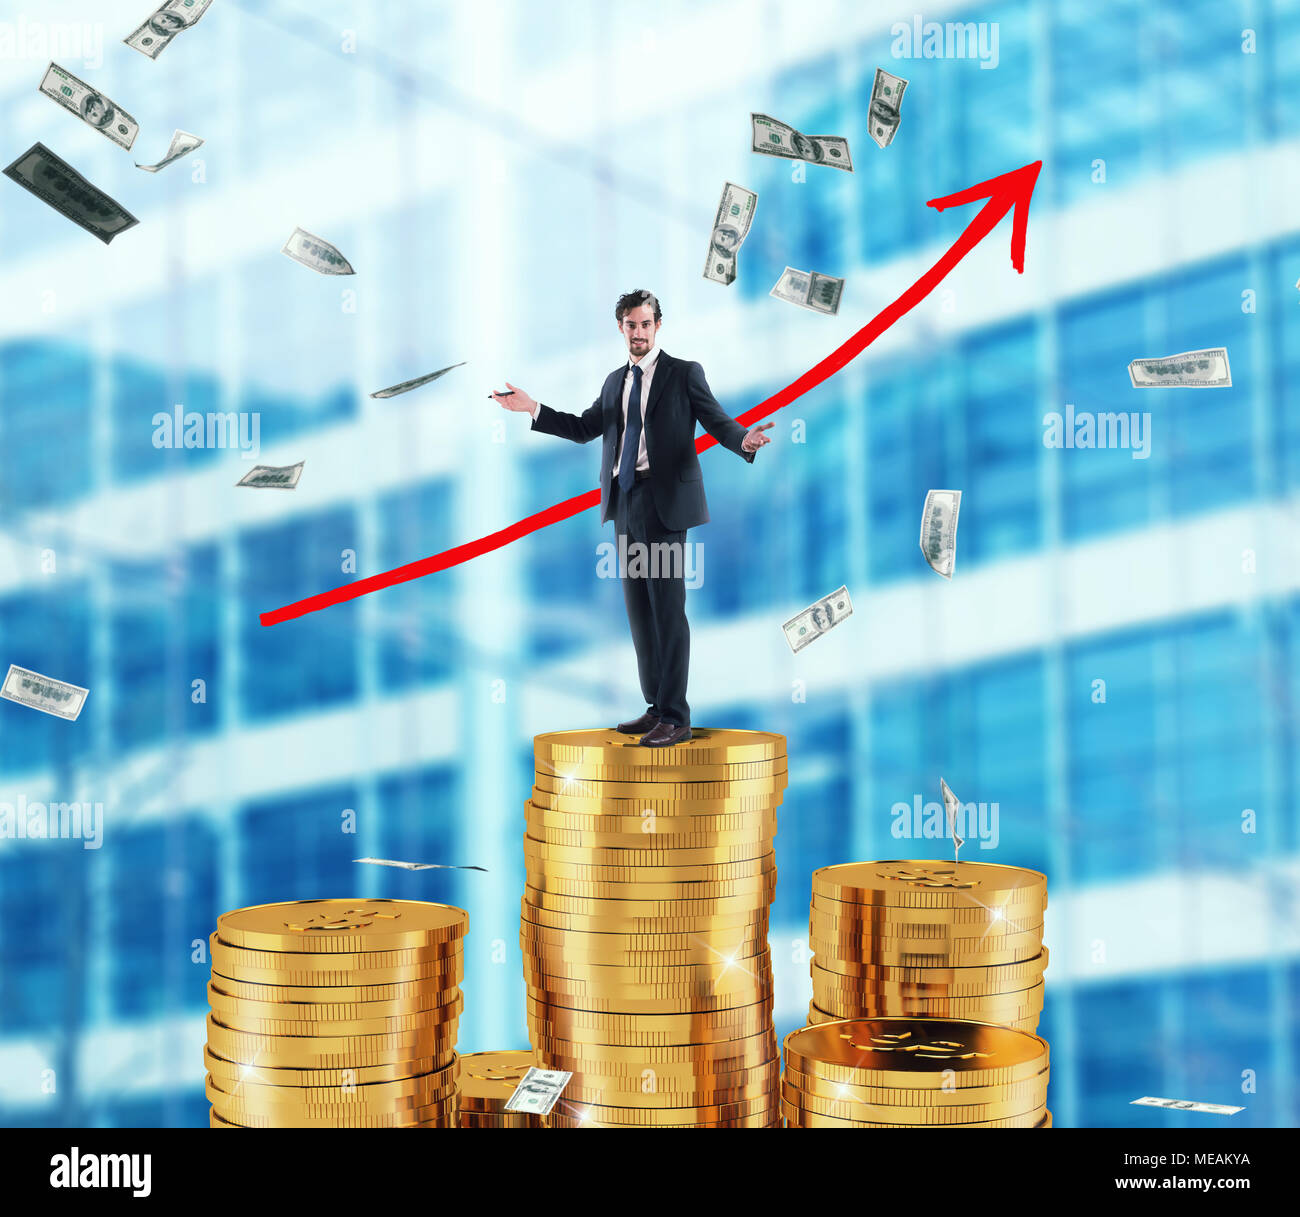 Businessman draws growing arrow of company statistics over a pile of money Stock Photo